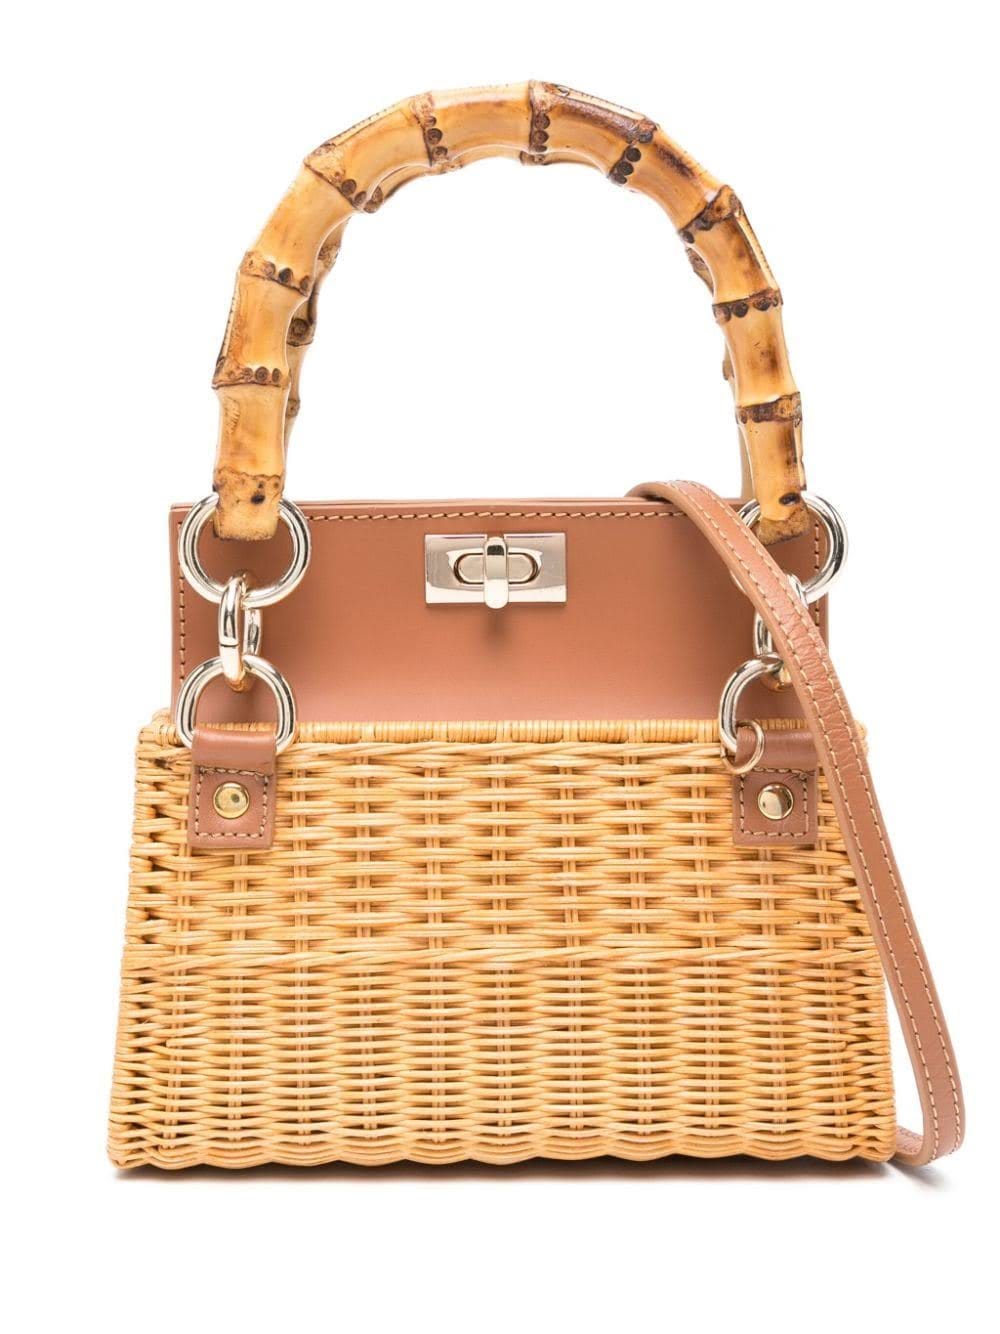 Stylish woven-wicker bag for everyday use | Image